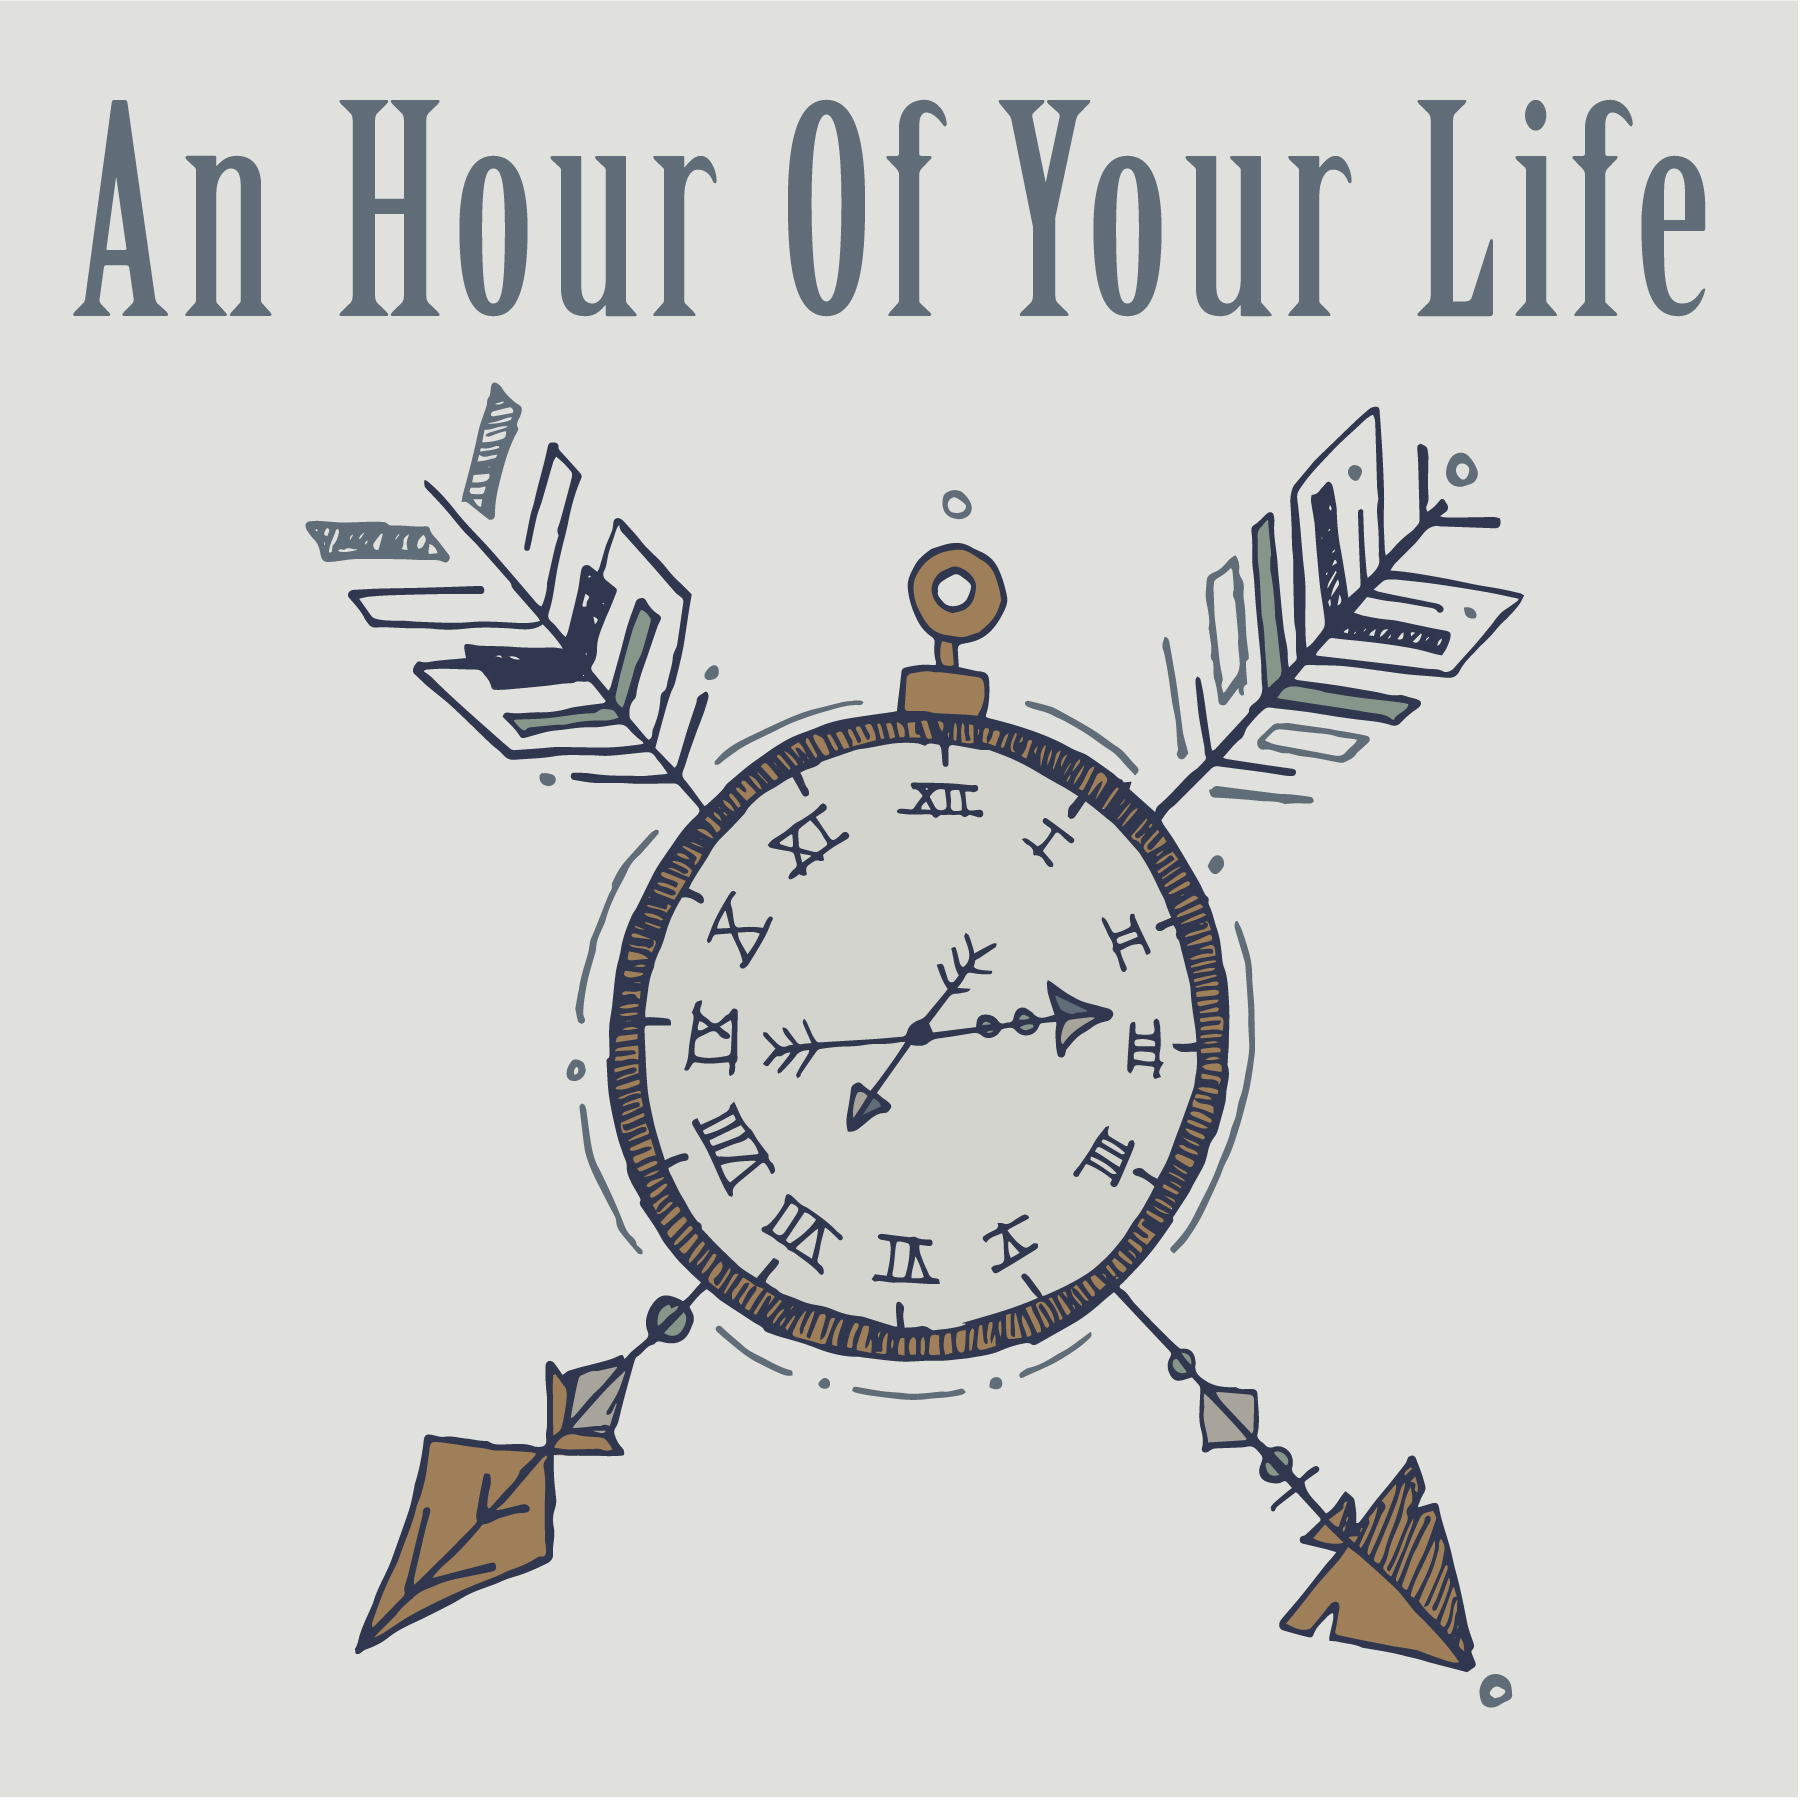 An Hour of Your Life